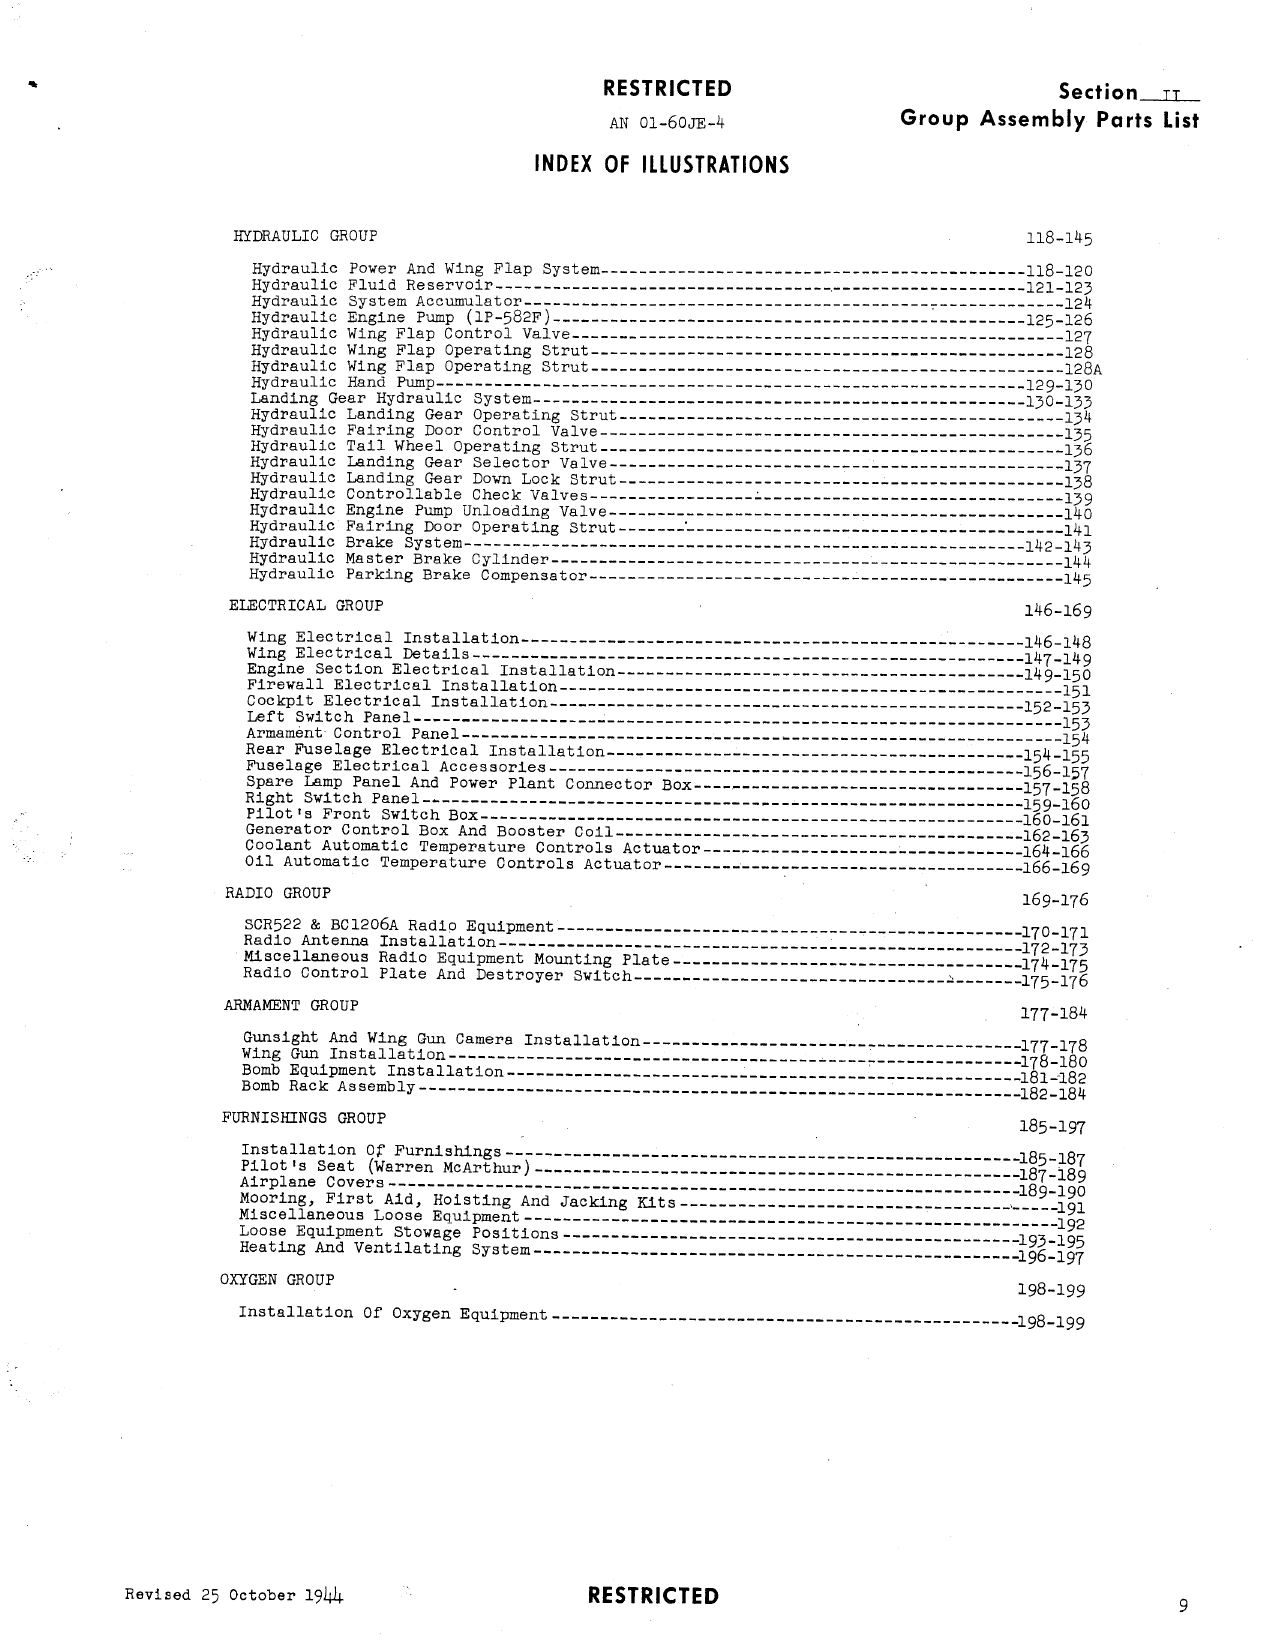 Sample page 13 from AirCorps Library document: P-51D Parts Catalog